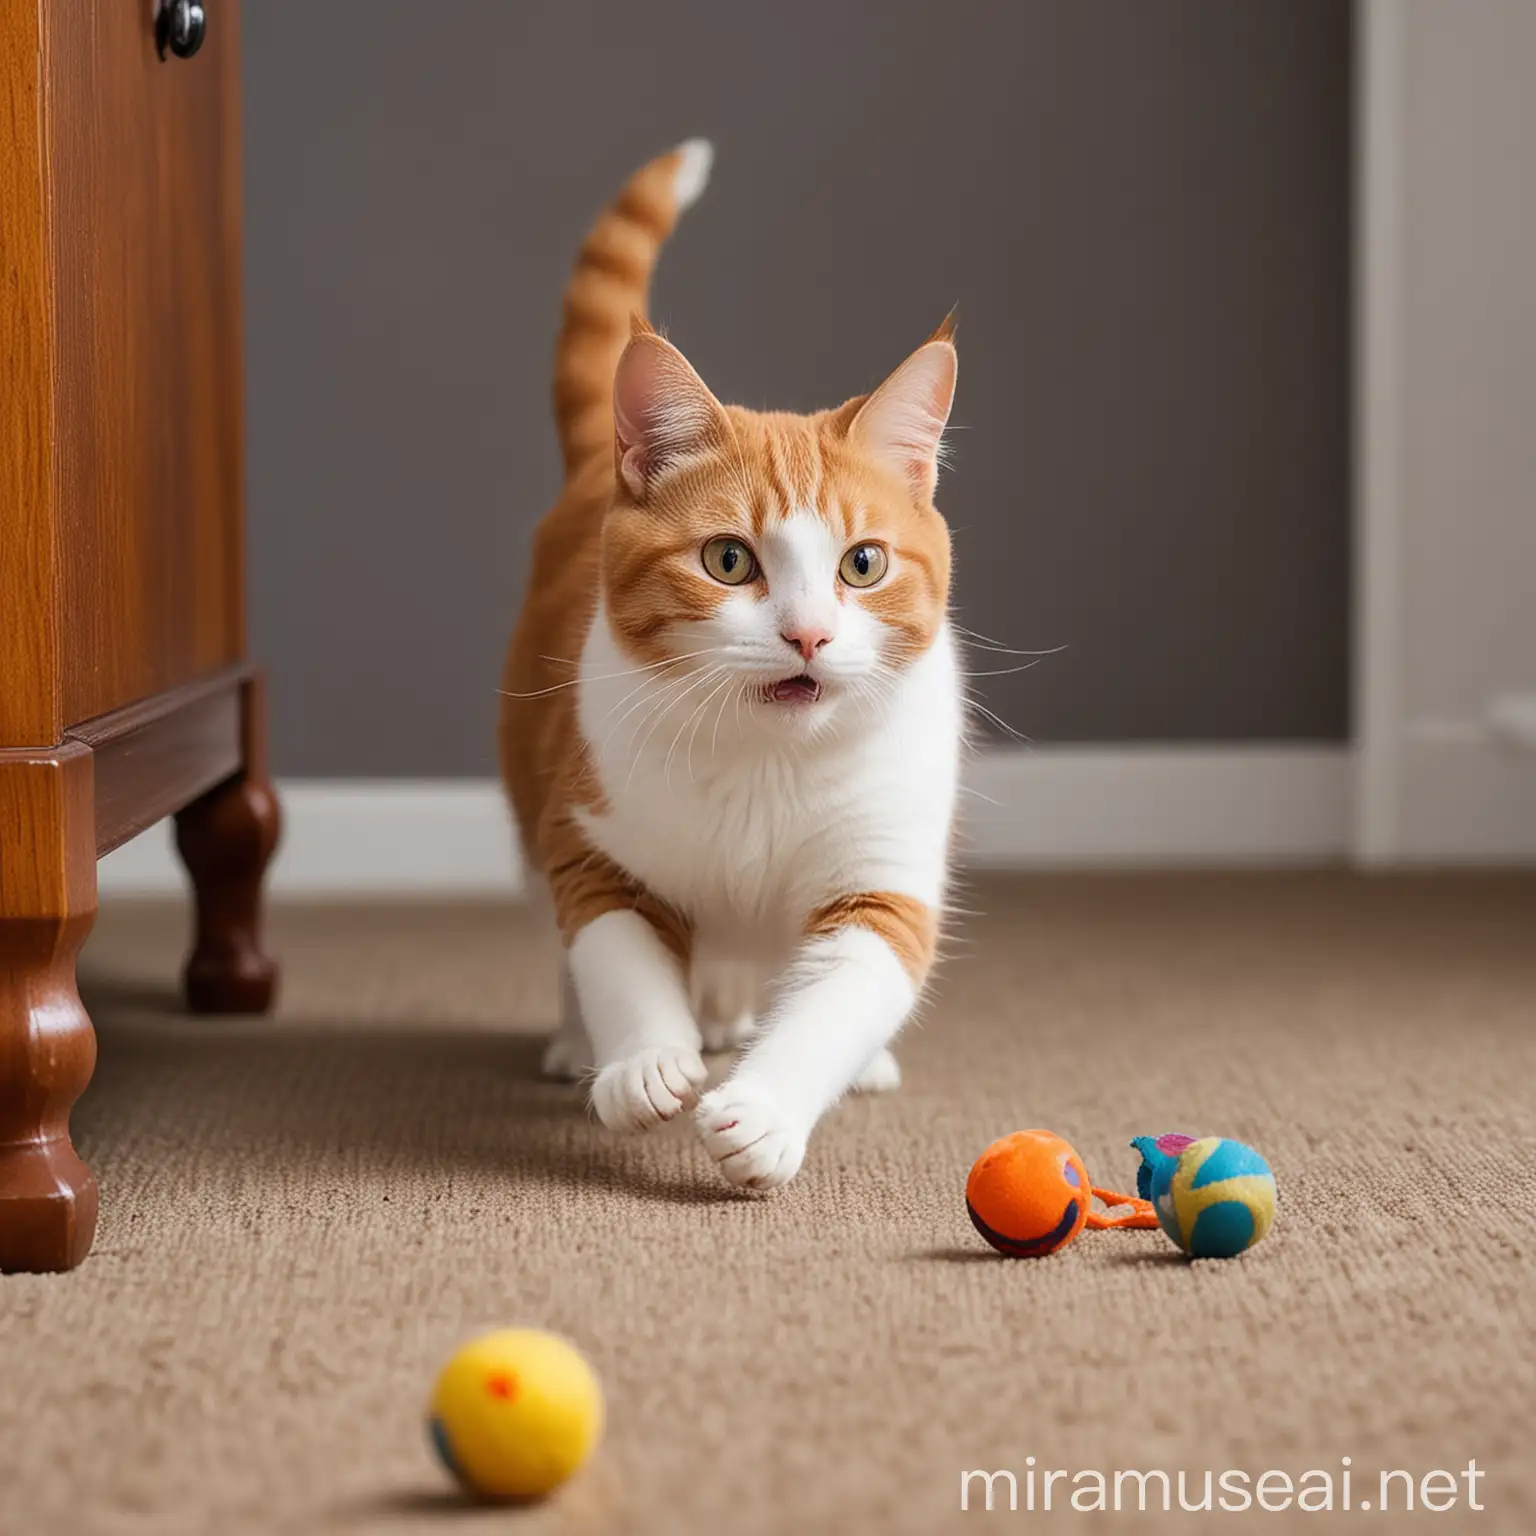 Showcase your cat's playful side with action shots of them chasing toys, pouncing, or playing hide and seek